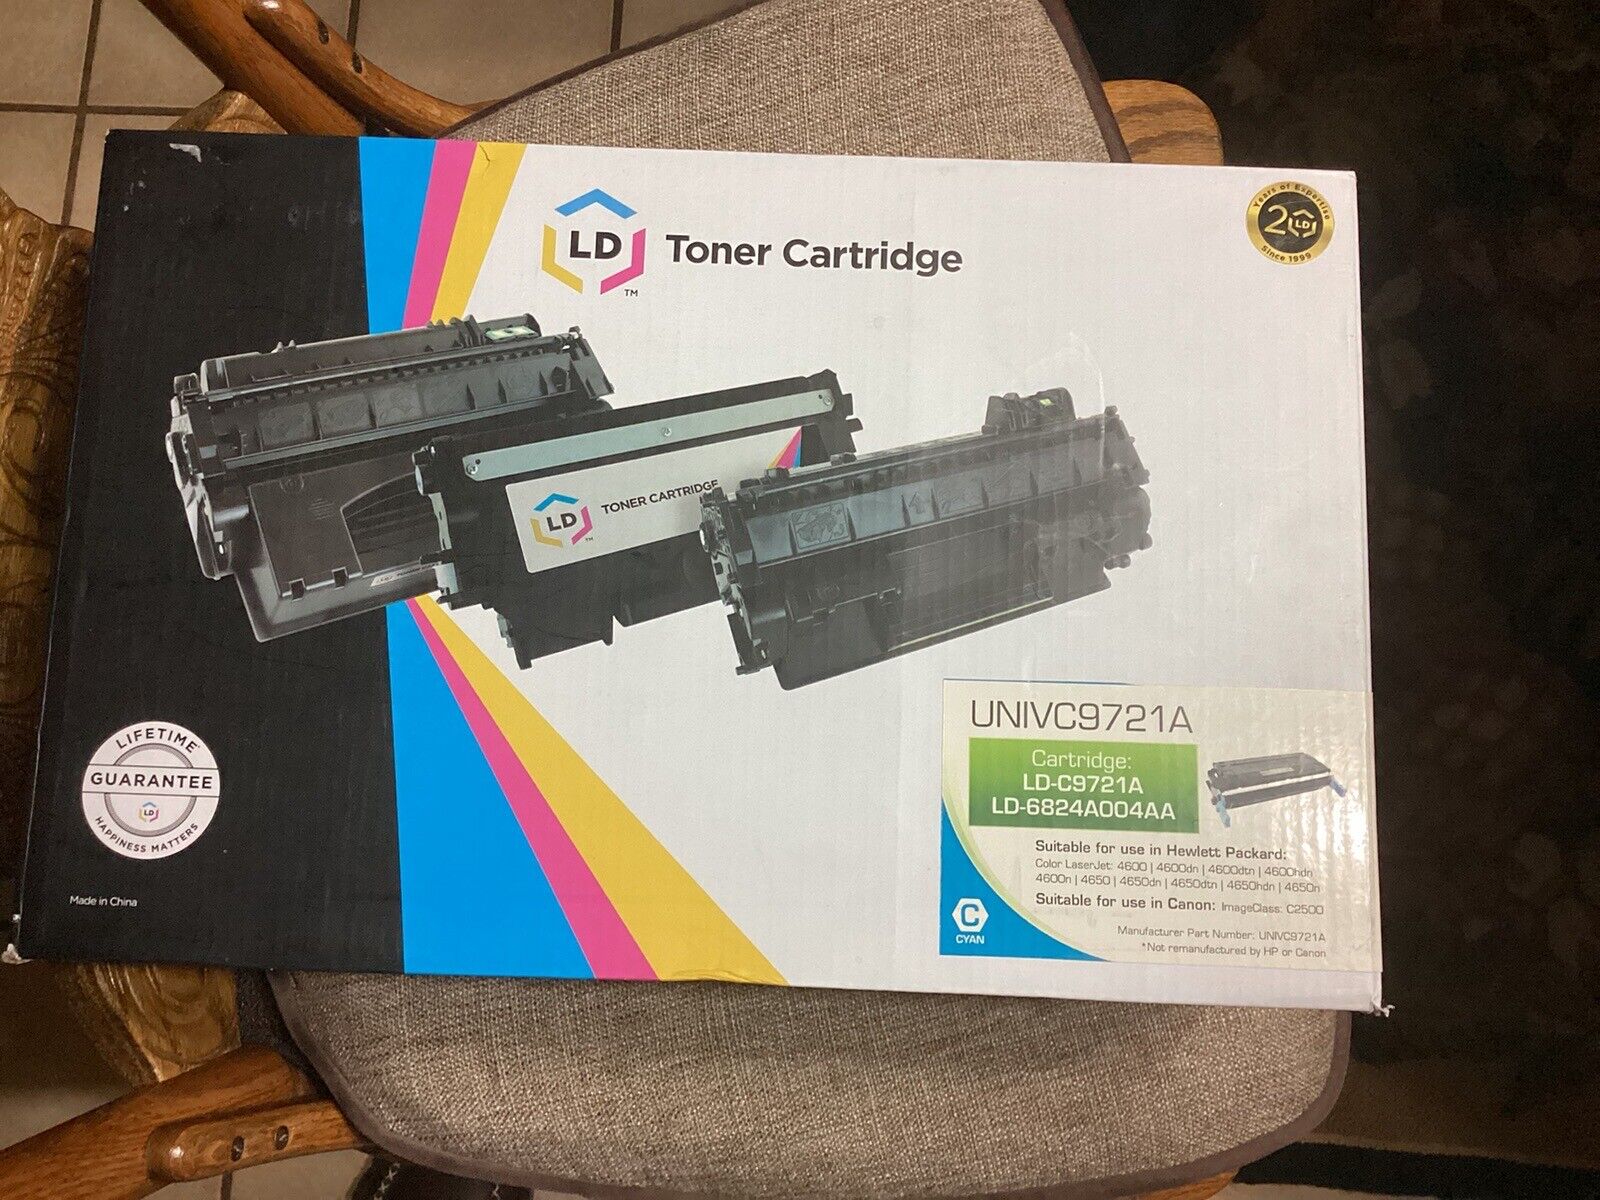 LD Factory New Sealed LASER TONER FOR HP LASER JET 4500/4650 C9721A Cyan, Cannon